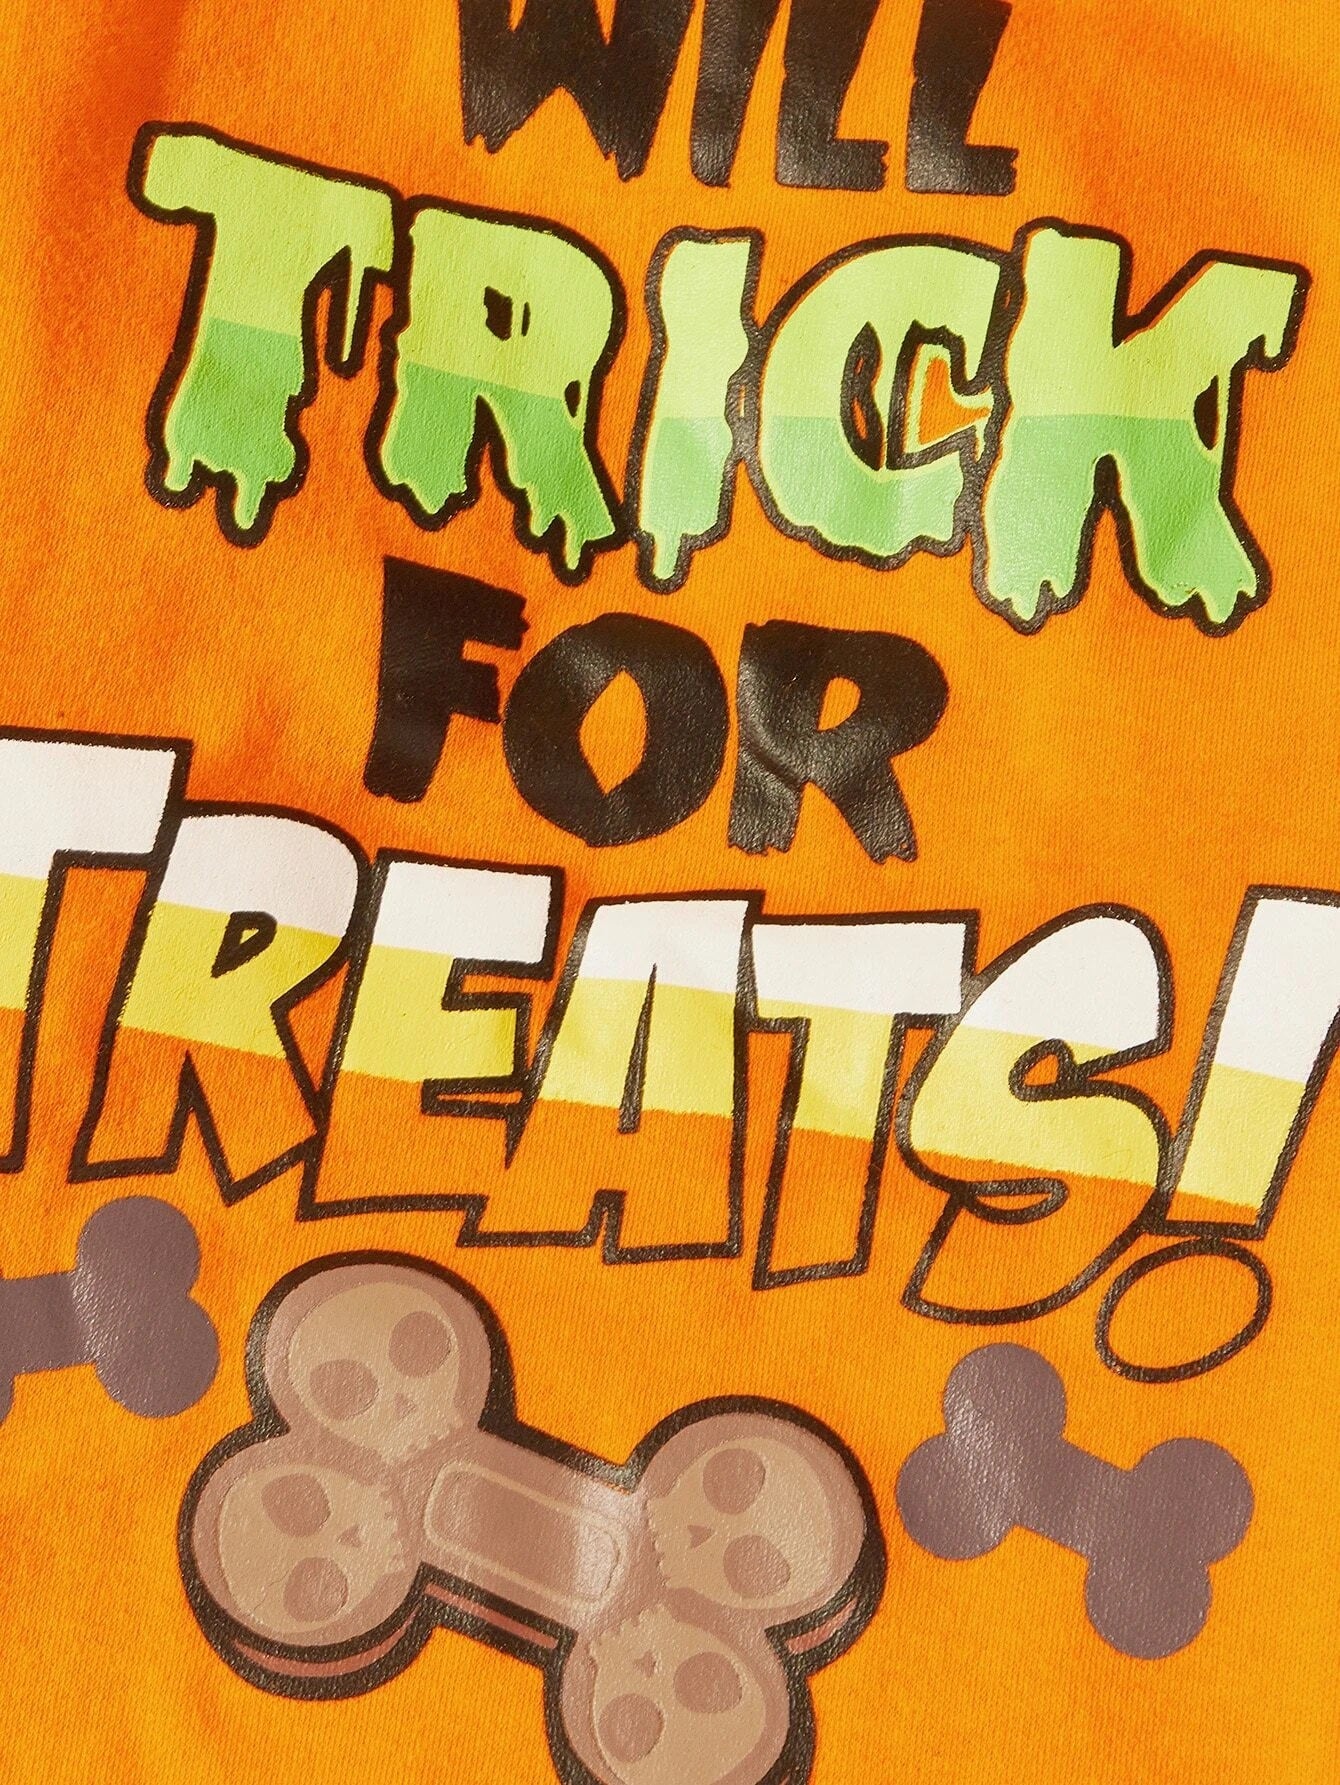 Halloween Trick for Treats Pet Clothing